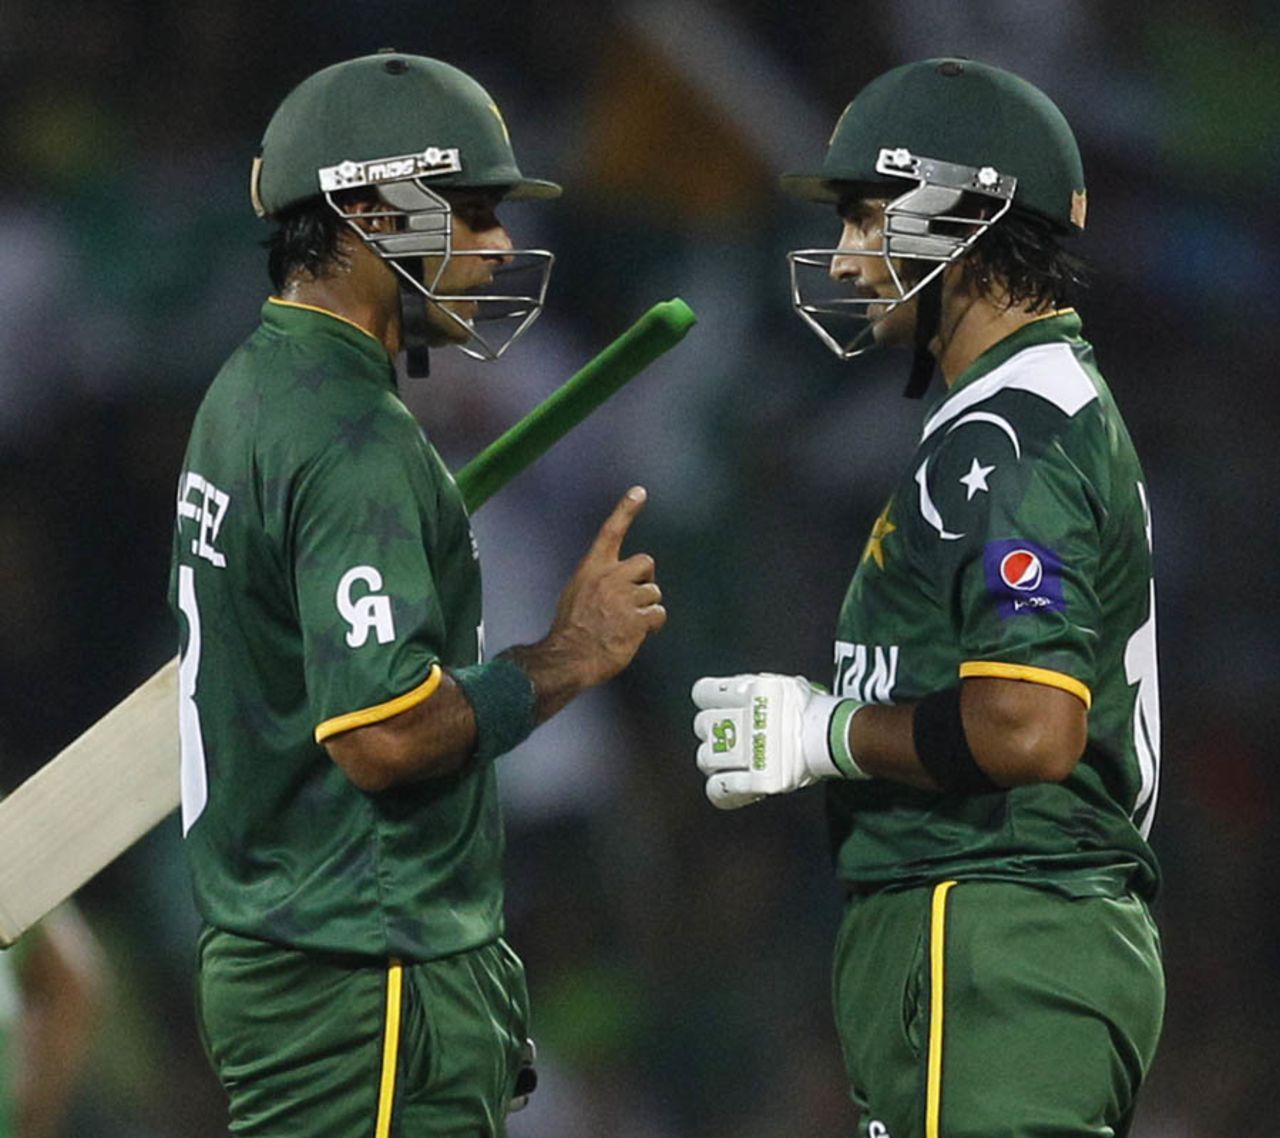 Mohammad Hafeez and Imran Nazir helped Pakistan to a strong start in their chase, Bangladesh v Pakistan, World Twenty20 2012, Group D, Pallekele, September 25, 2012